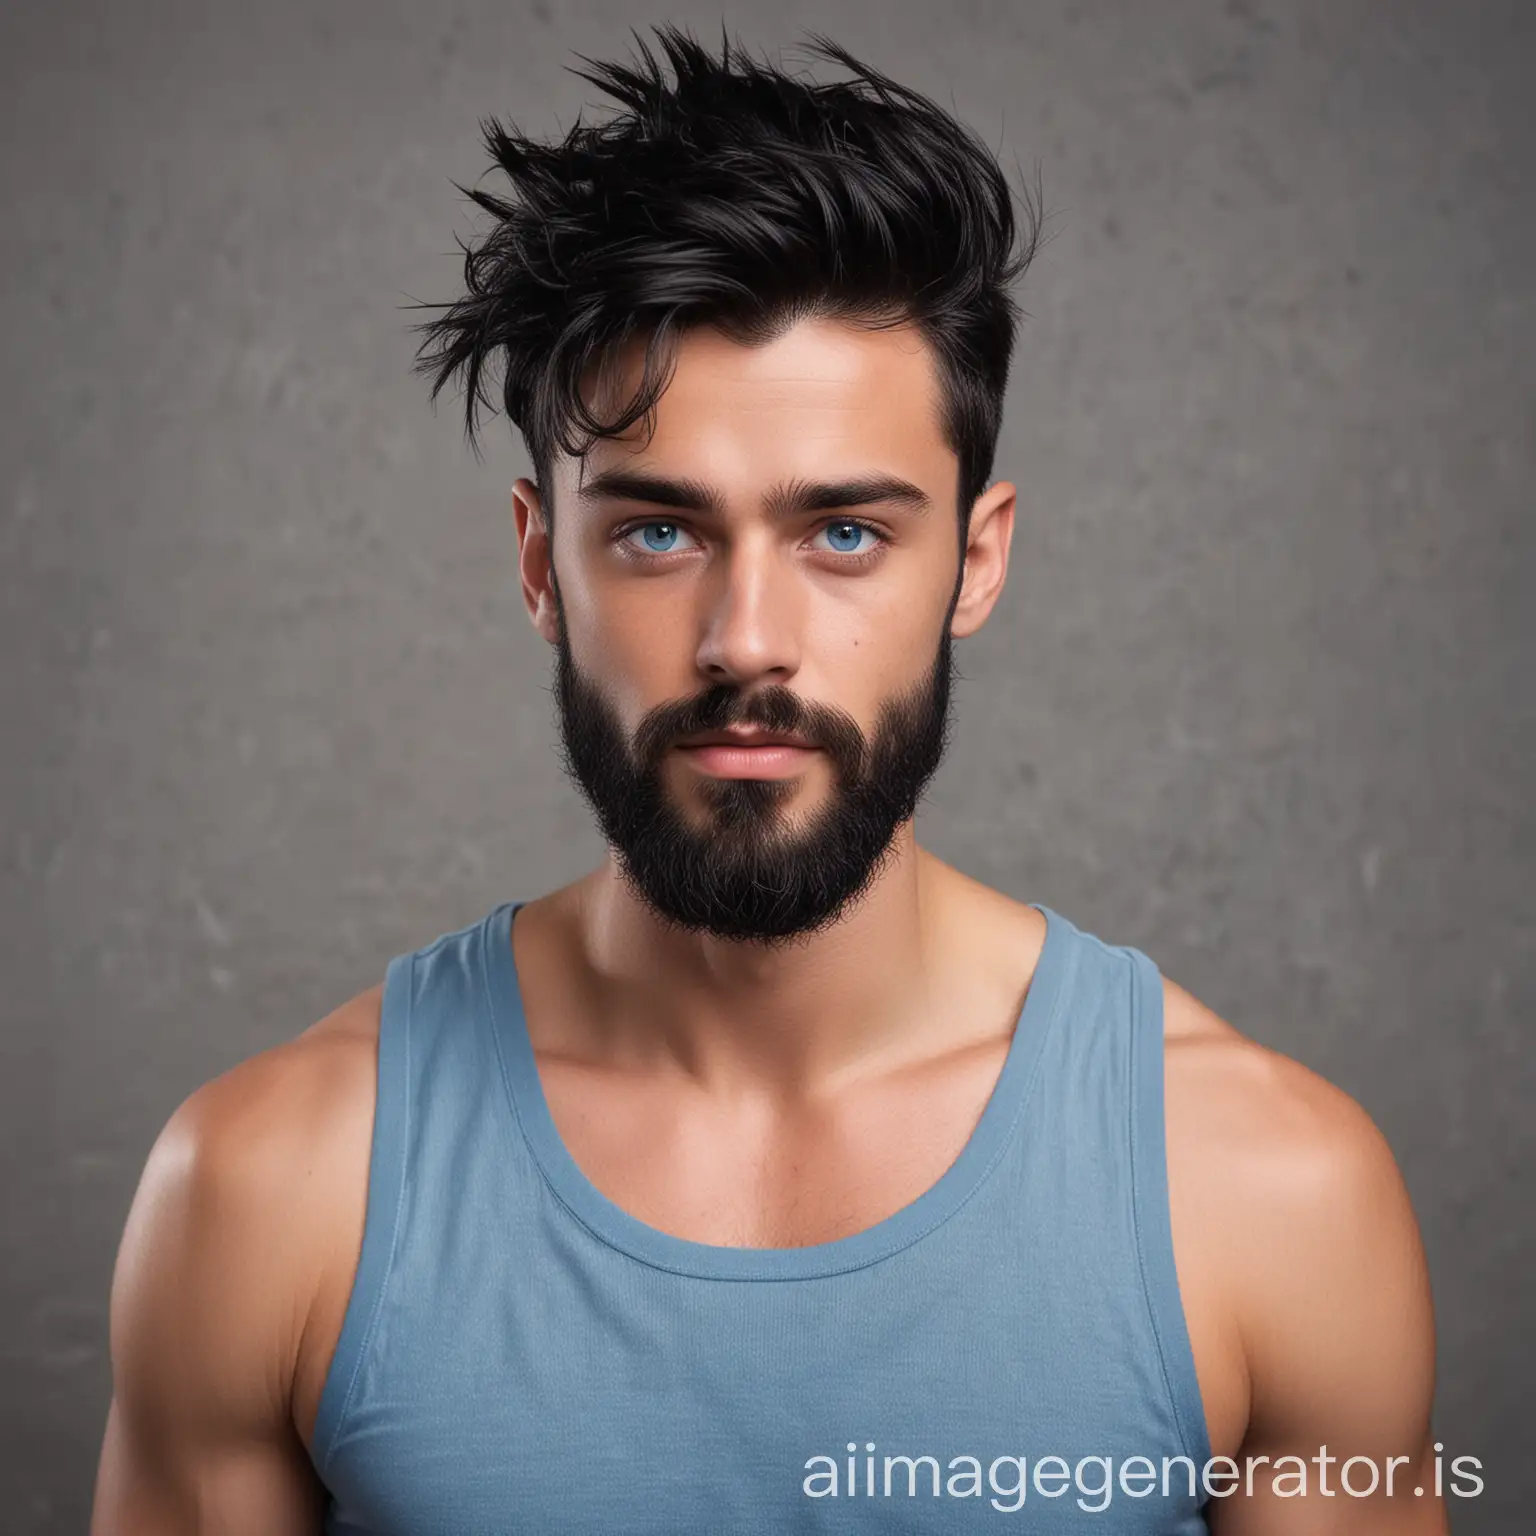 a young handsome Dutchman with beard and black hair in a long high hair in a quiff. Clear blue eyes In a tanktop and a bit longer beard and chest hair peaking out of his tanktop Verry muscular